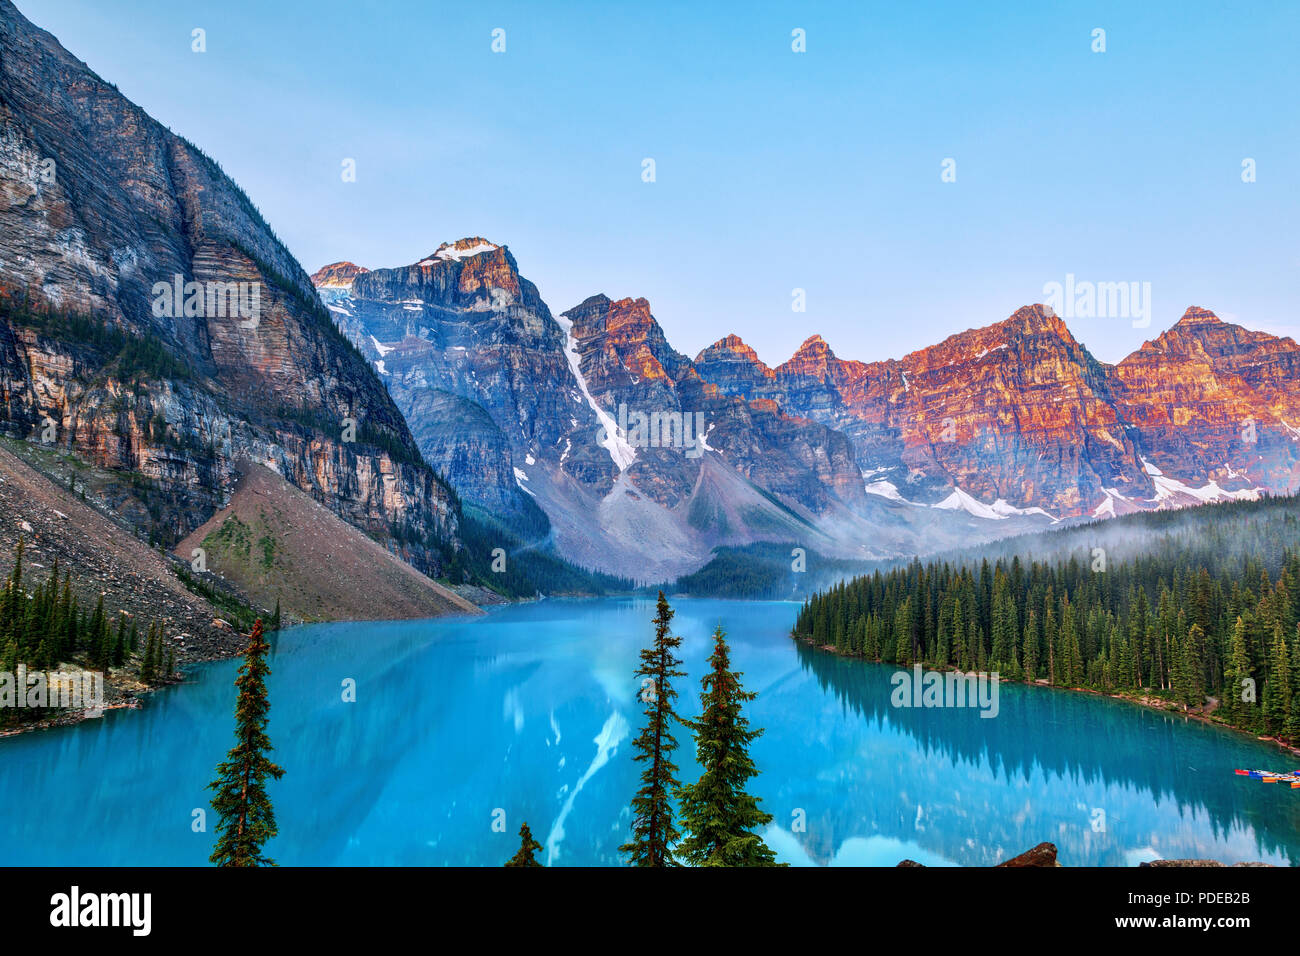 Sunrise over the Valley of the Ten Peaks with glacier-fed turquoise colored Moraine Lake in the foreground near Lake Louise in the Canadian Rockies. Stock Photo